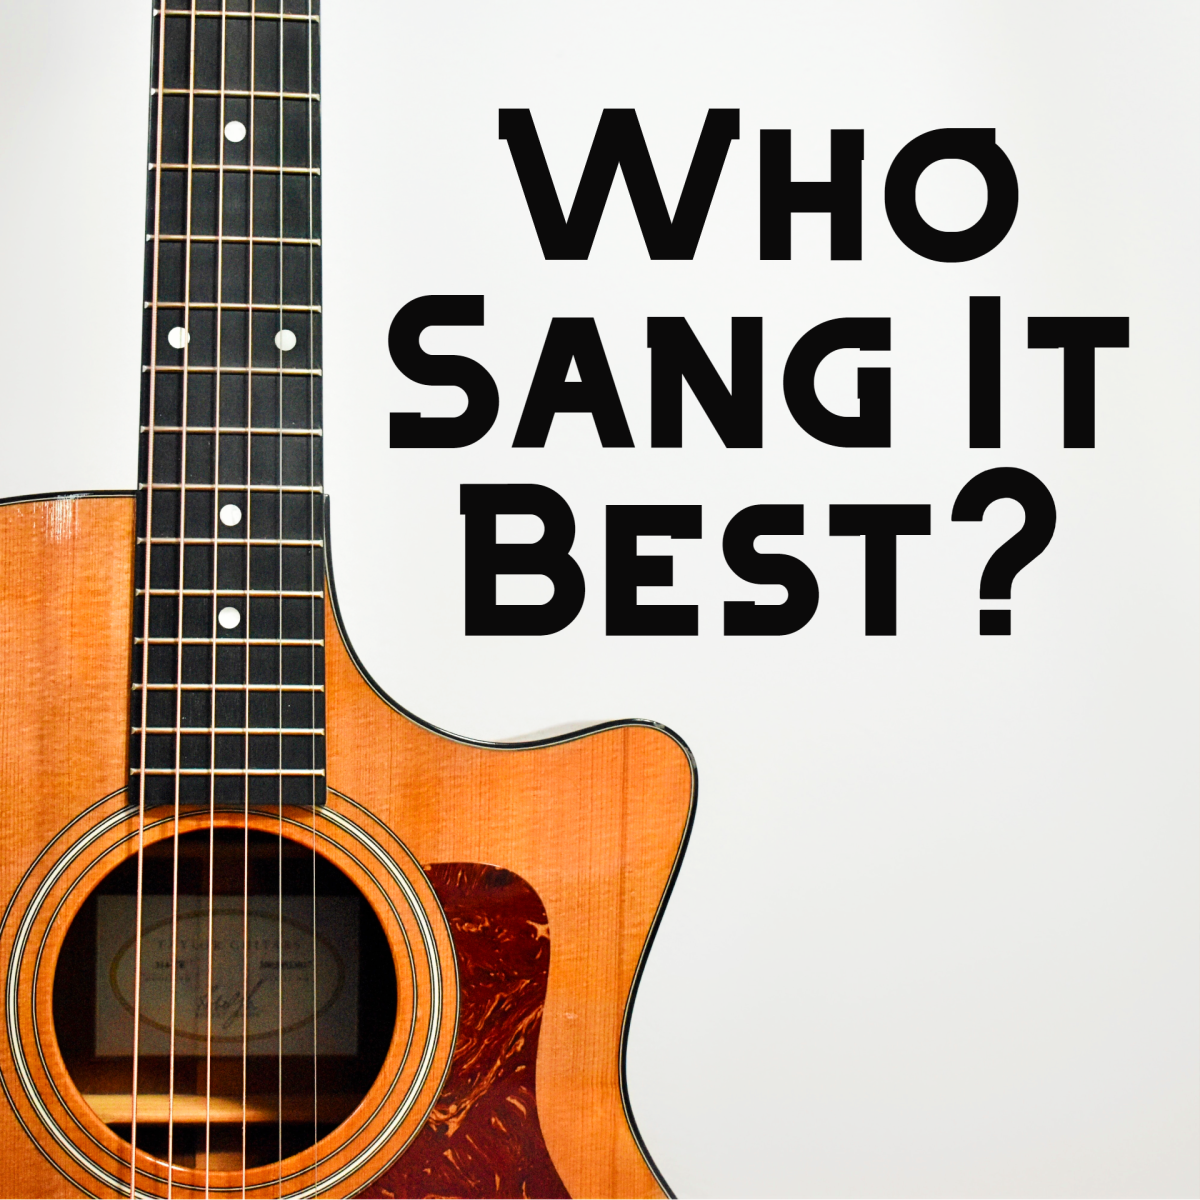 Some of the most recognized and loved pop, rock, and R&B hits are actually covers of country songs.  Listen to the original song and covers and decide who sang it best.